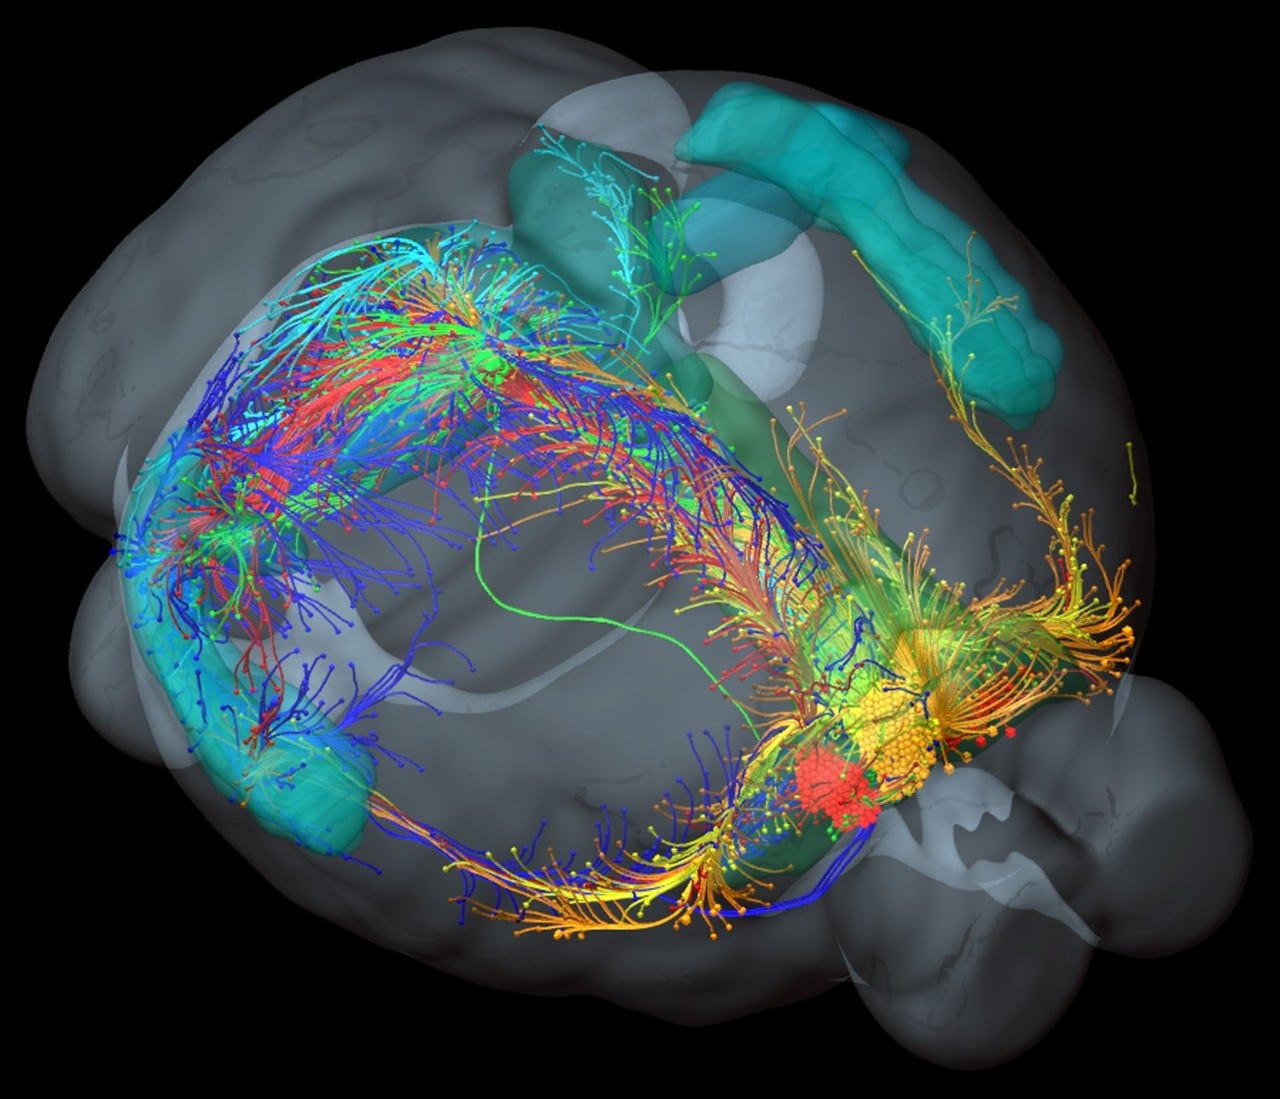 Digital image of a mouse brain with mapping